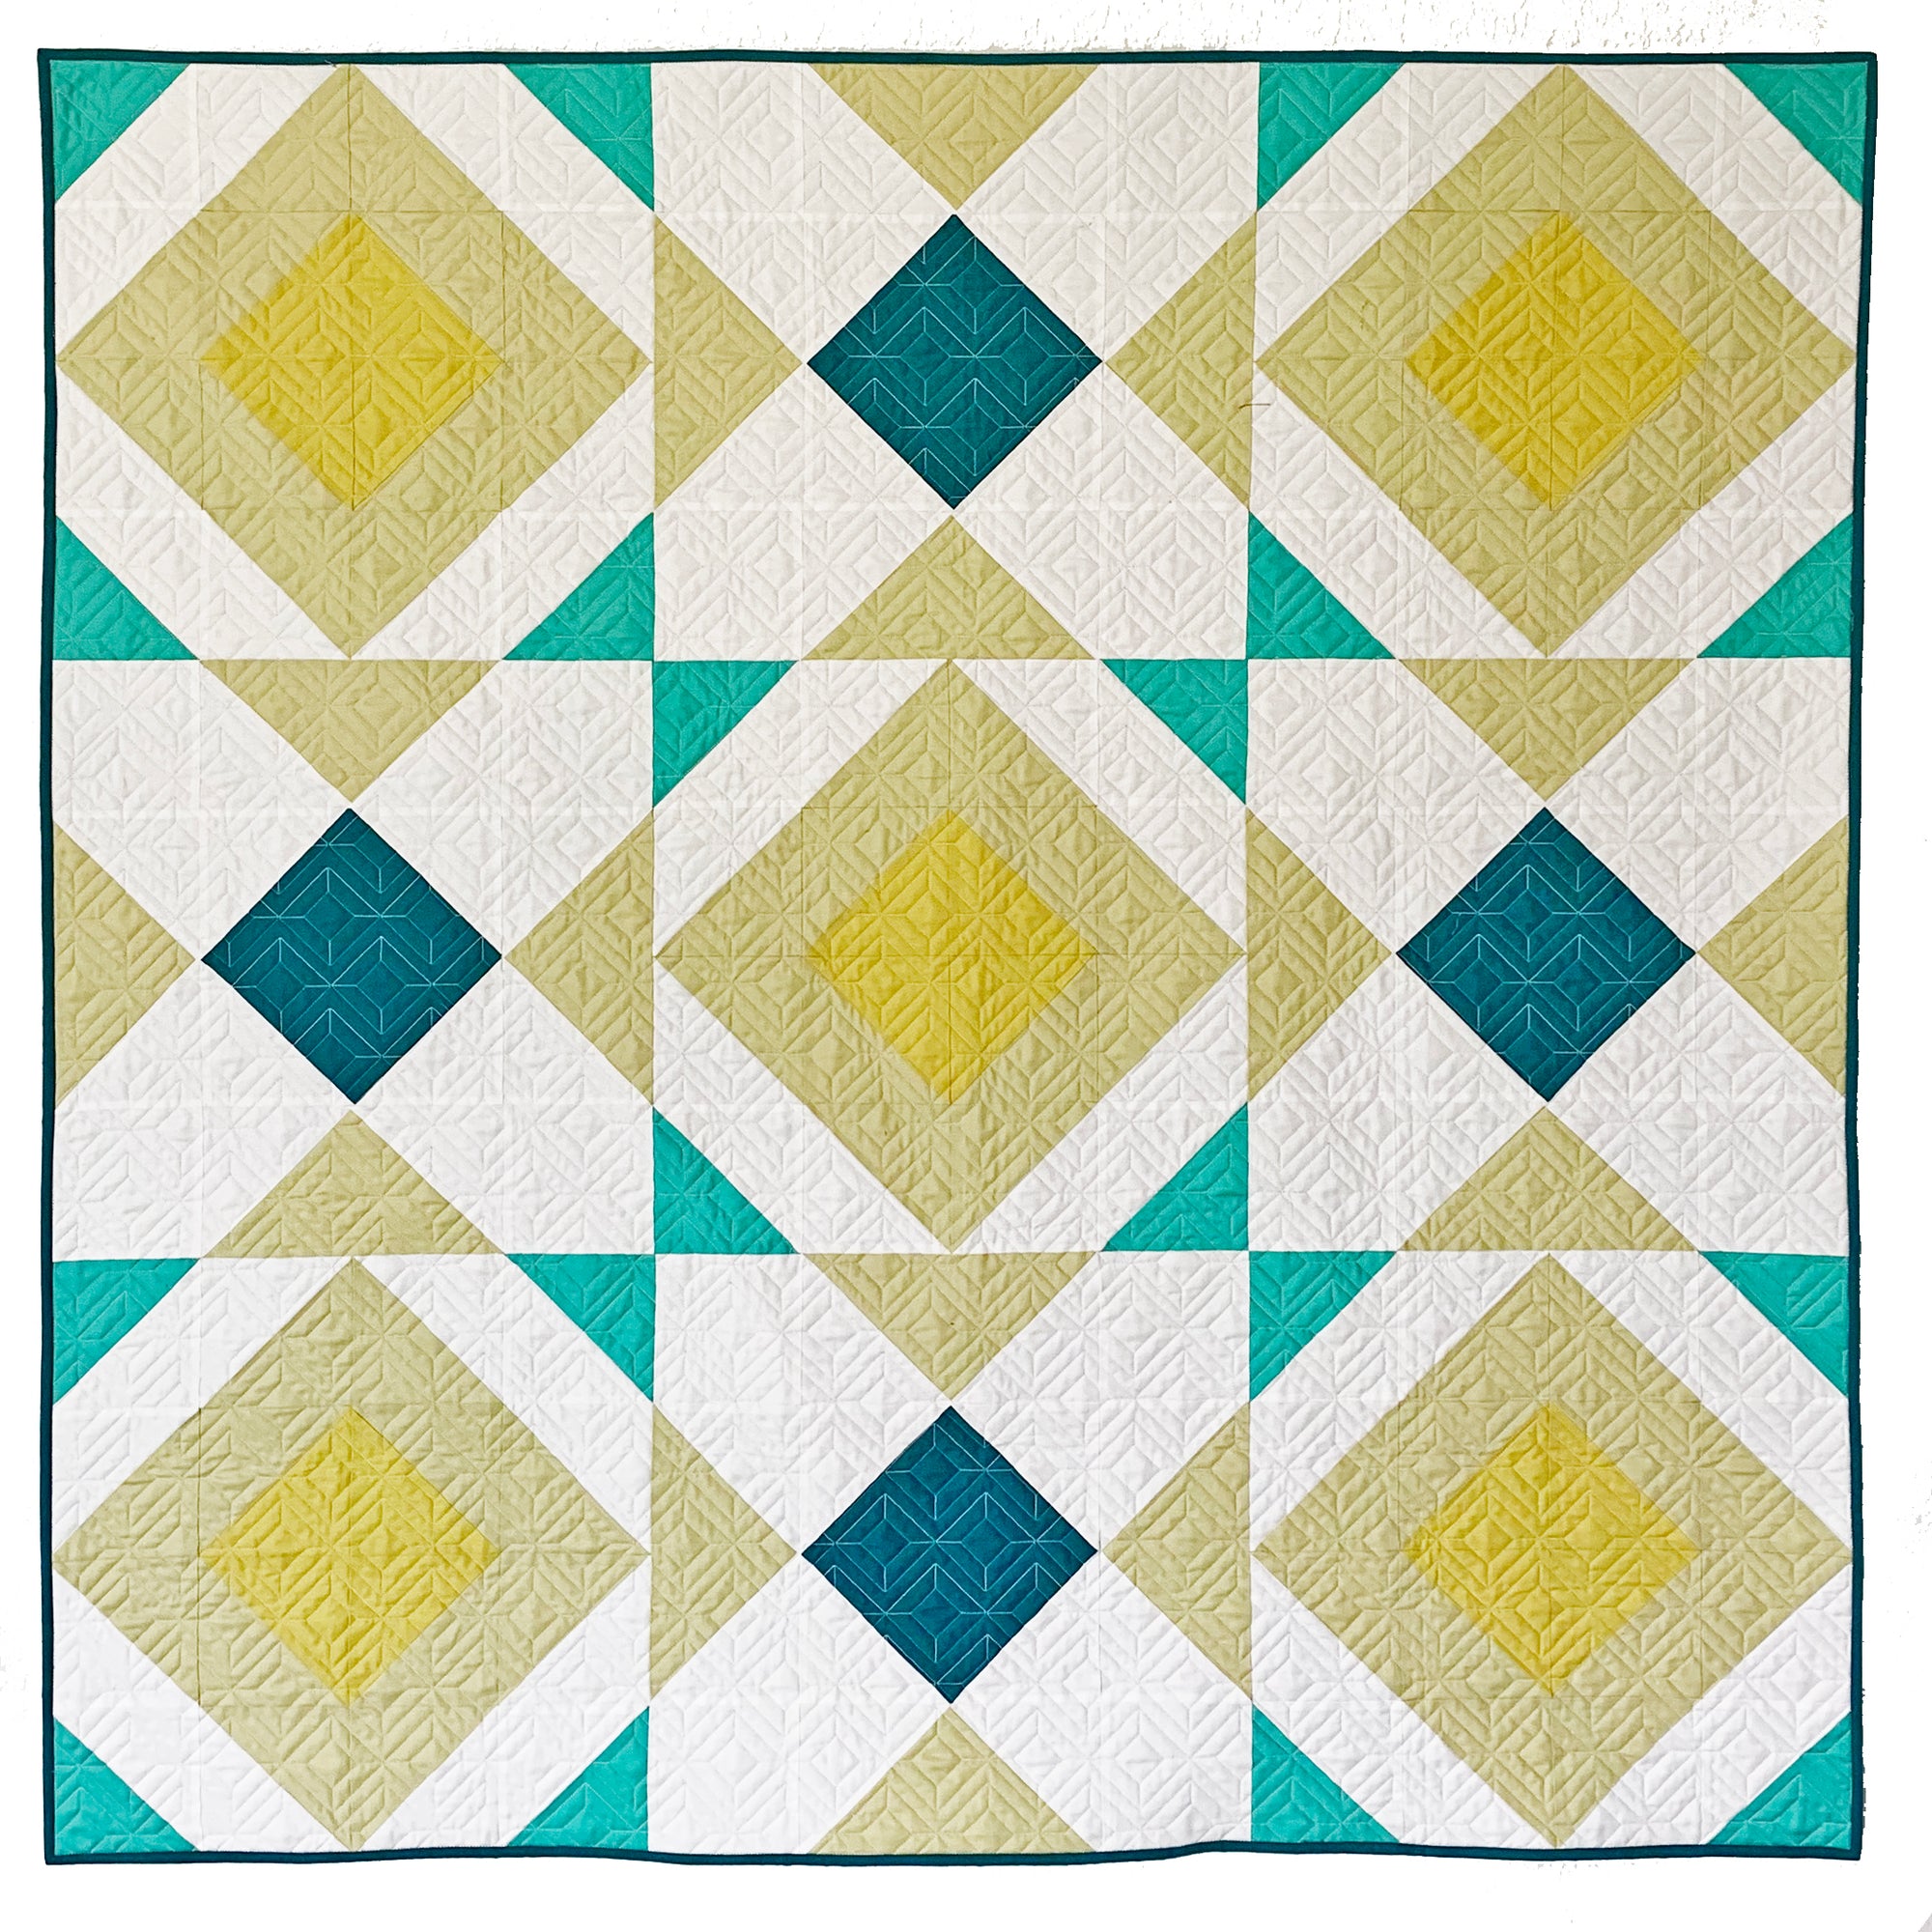 Noughts and Crosses Quilt Pattern - PRINTED